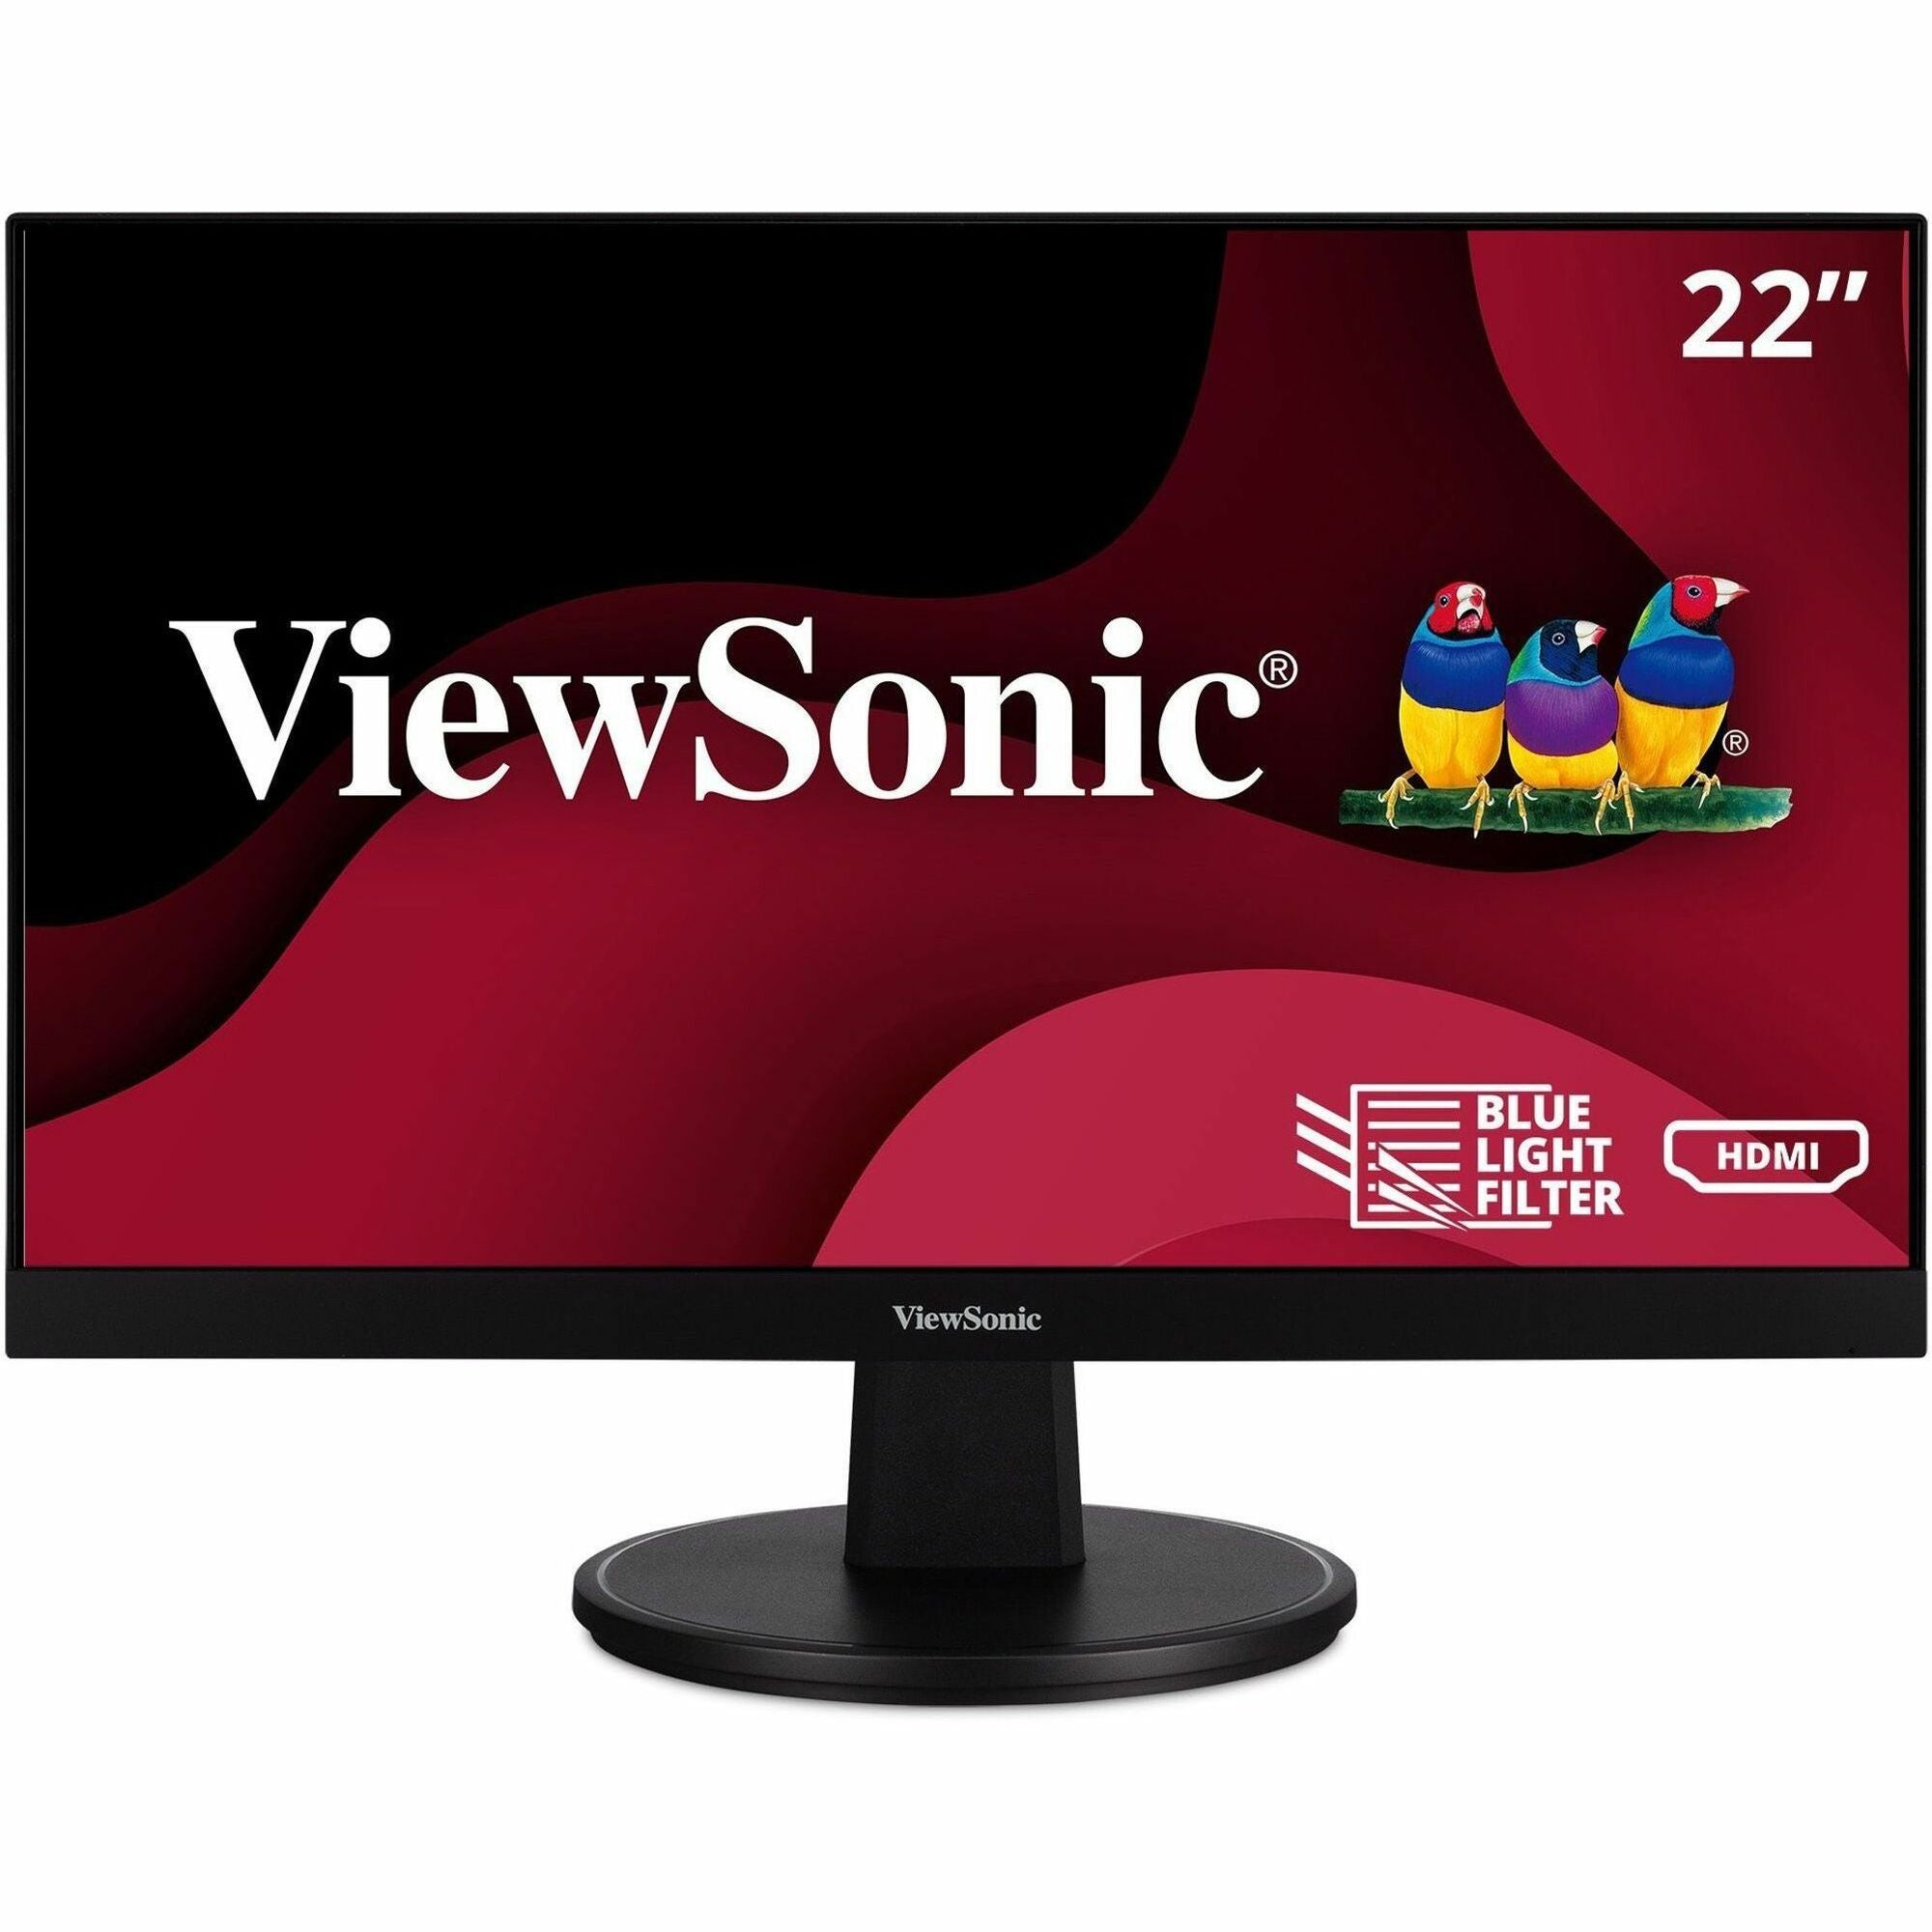 viewsonic-va2256-mhd-22-inch-ips-1080p-monitor-with-ultra-thin-bezels-hdmi-displayport-and-vga-inputs-for-home-and-office-va2256-mhd-ips-1080p-monitor-with-ultra-thin-bezels-hdmi-displayport-and-vga-250-cd-m2-22_vewva2256mhd - 1